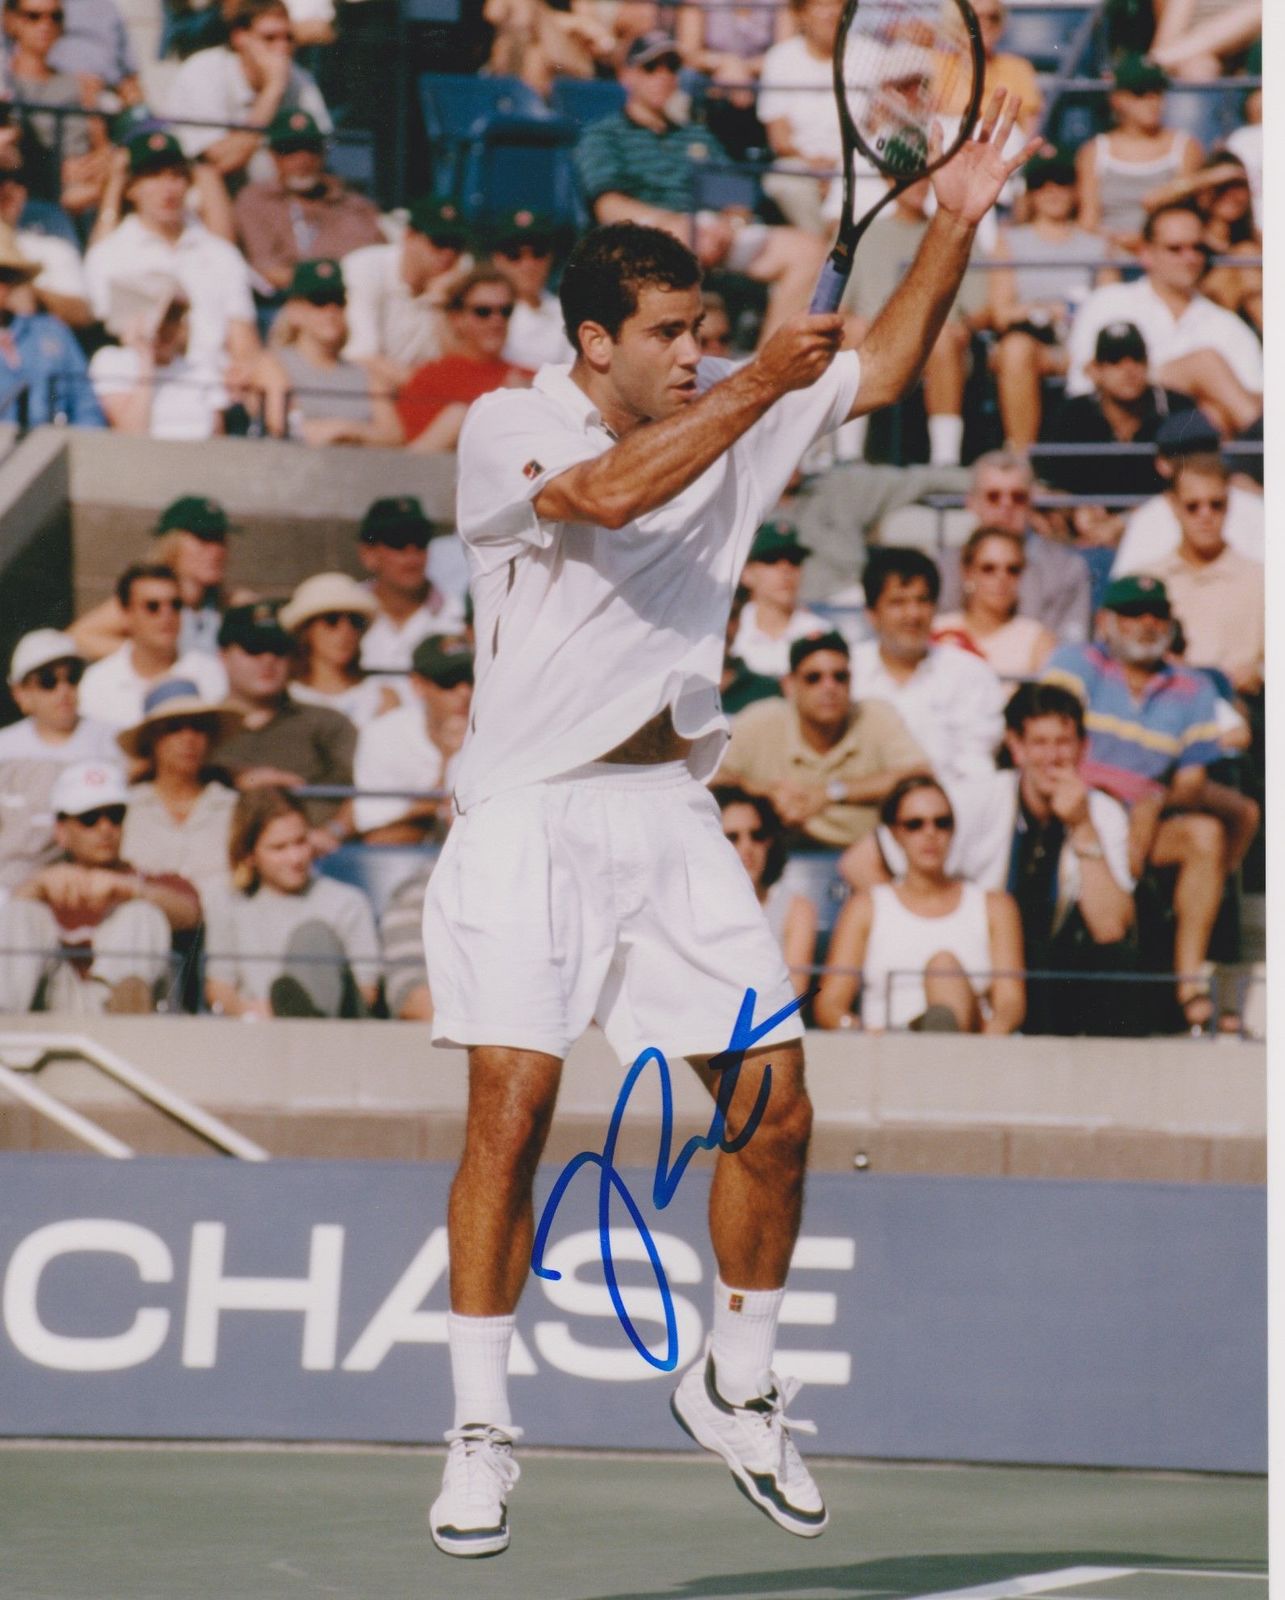 Pete Sampras Signed Autographed Glossy 8x10 Photo - Tennis